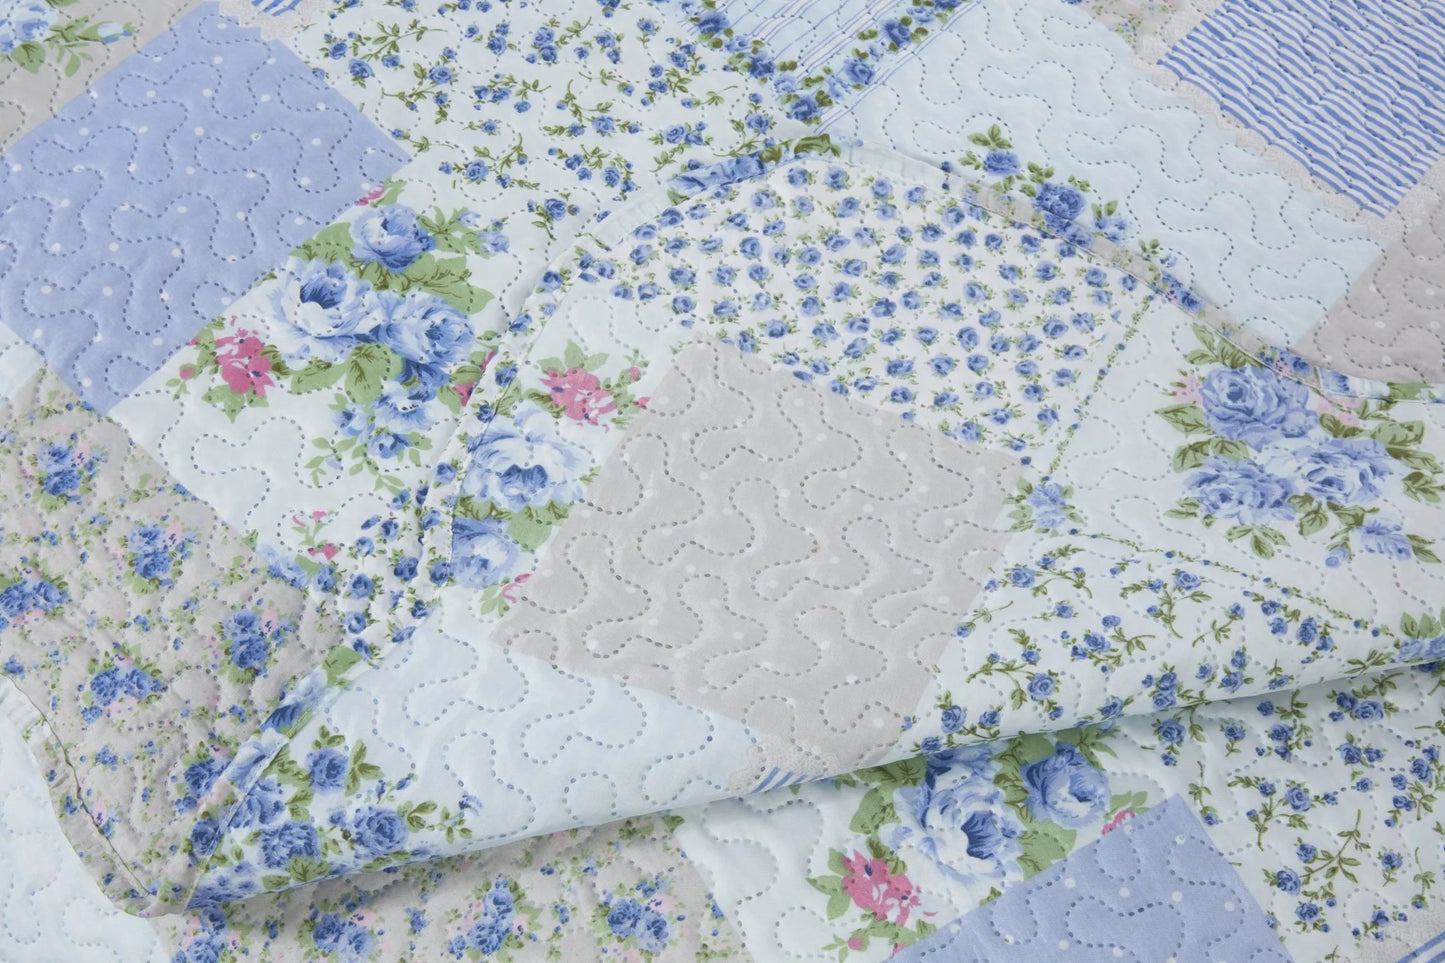 Cotswold Bed Spread - Blue